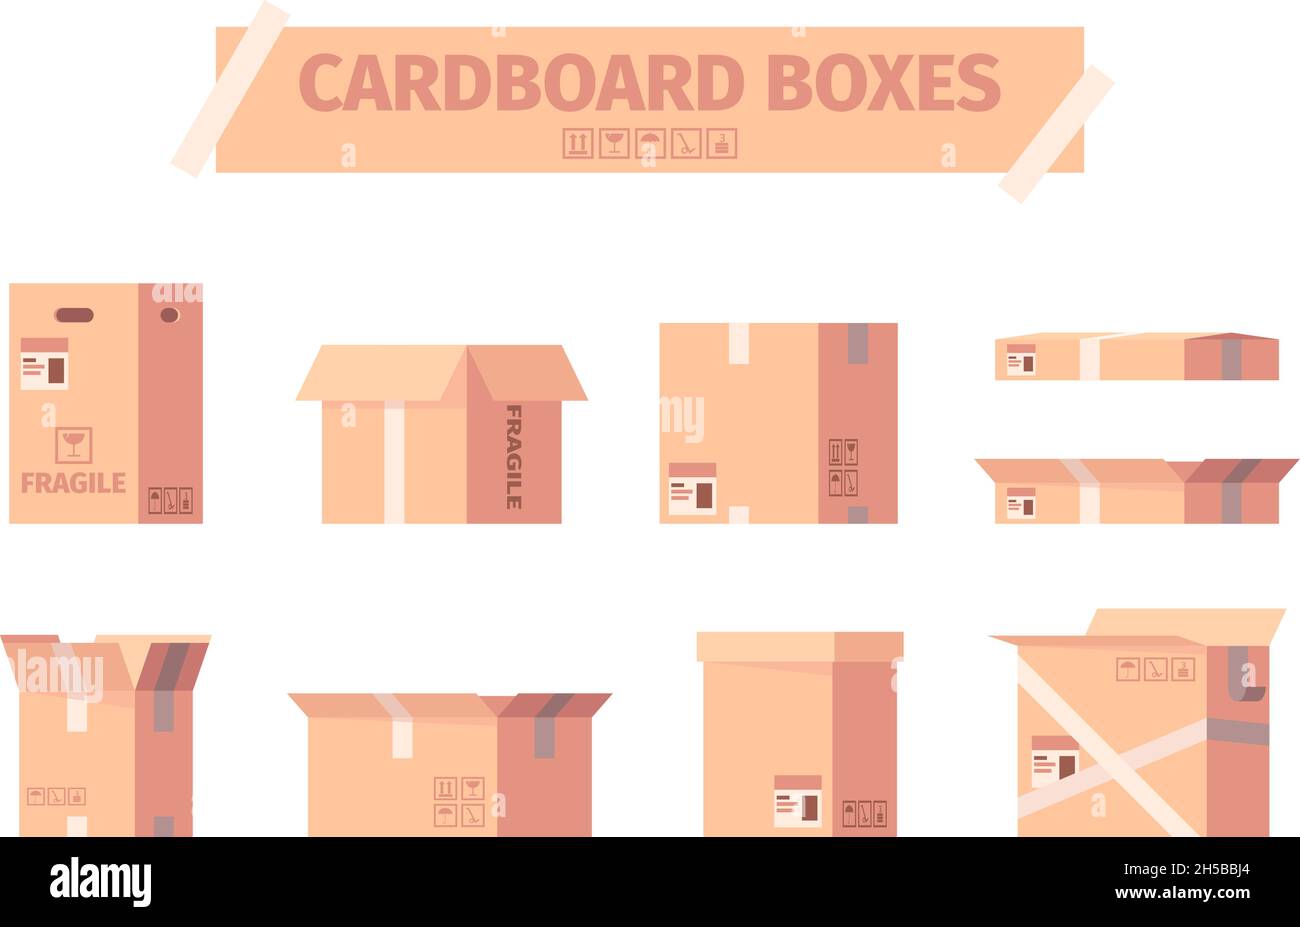 Cardboard boxes. Delivery packages shipping container symbols garish vector illustrations collection Stock Vector